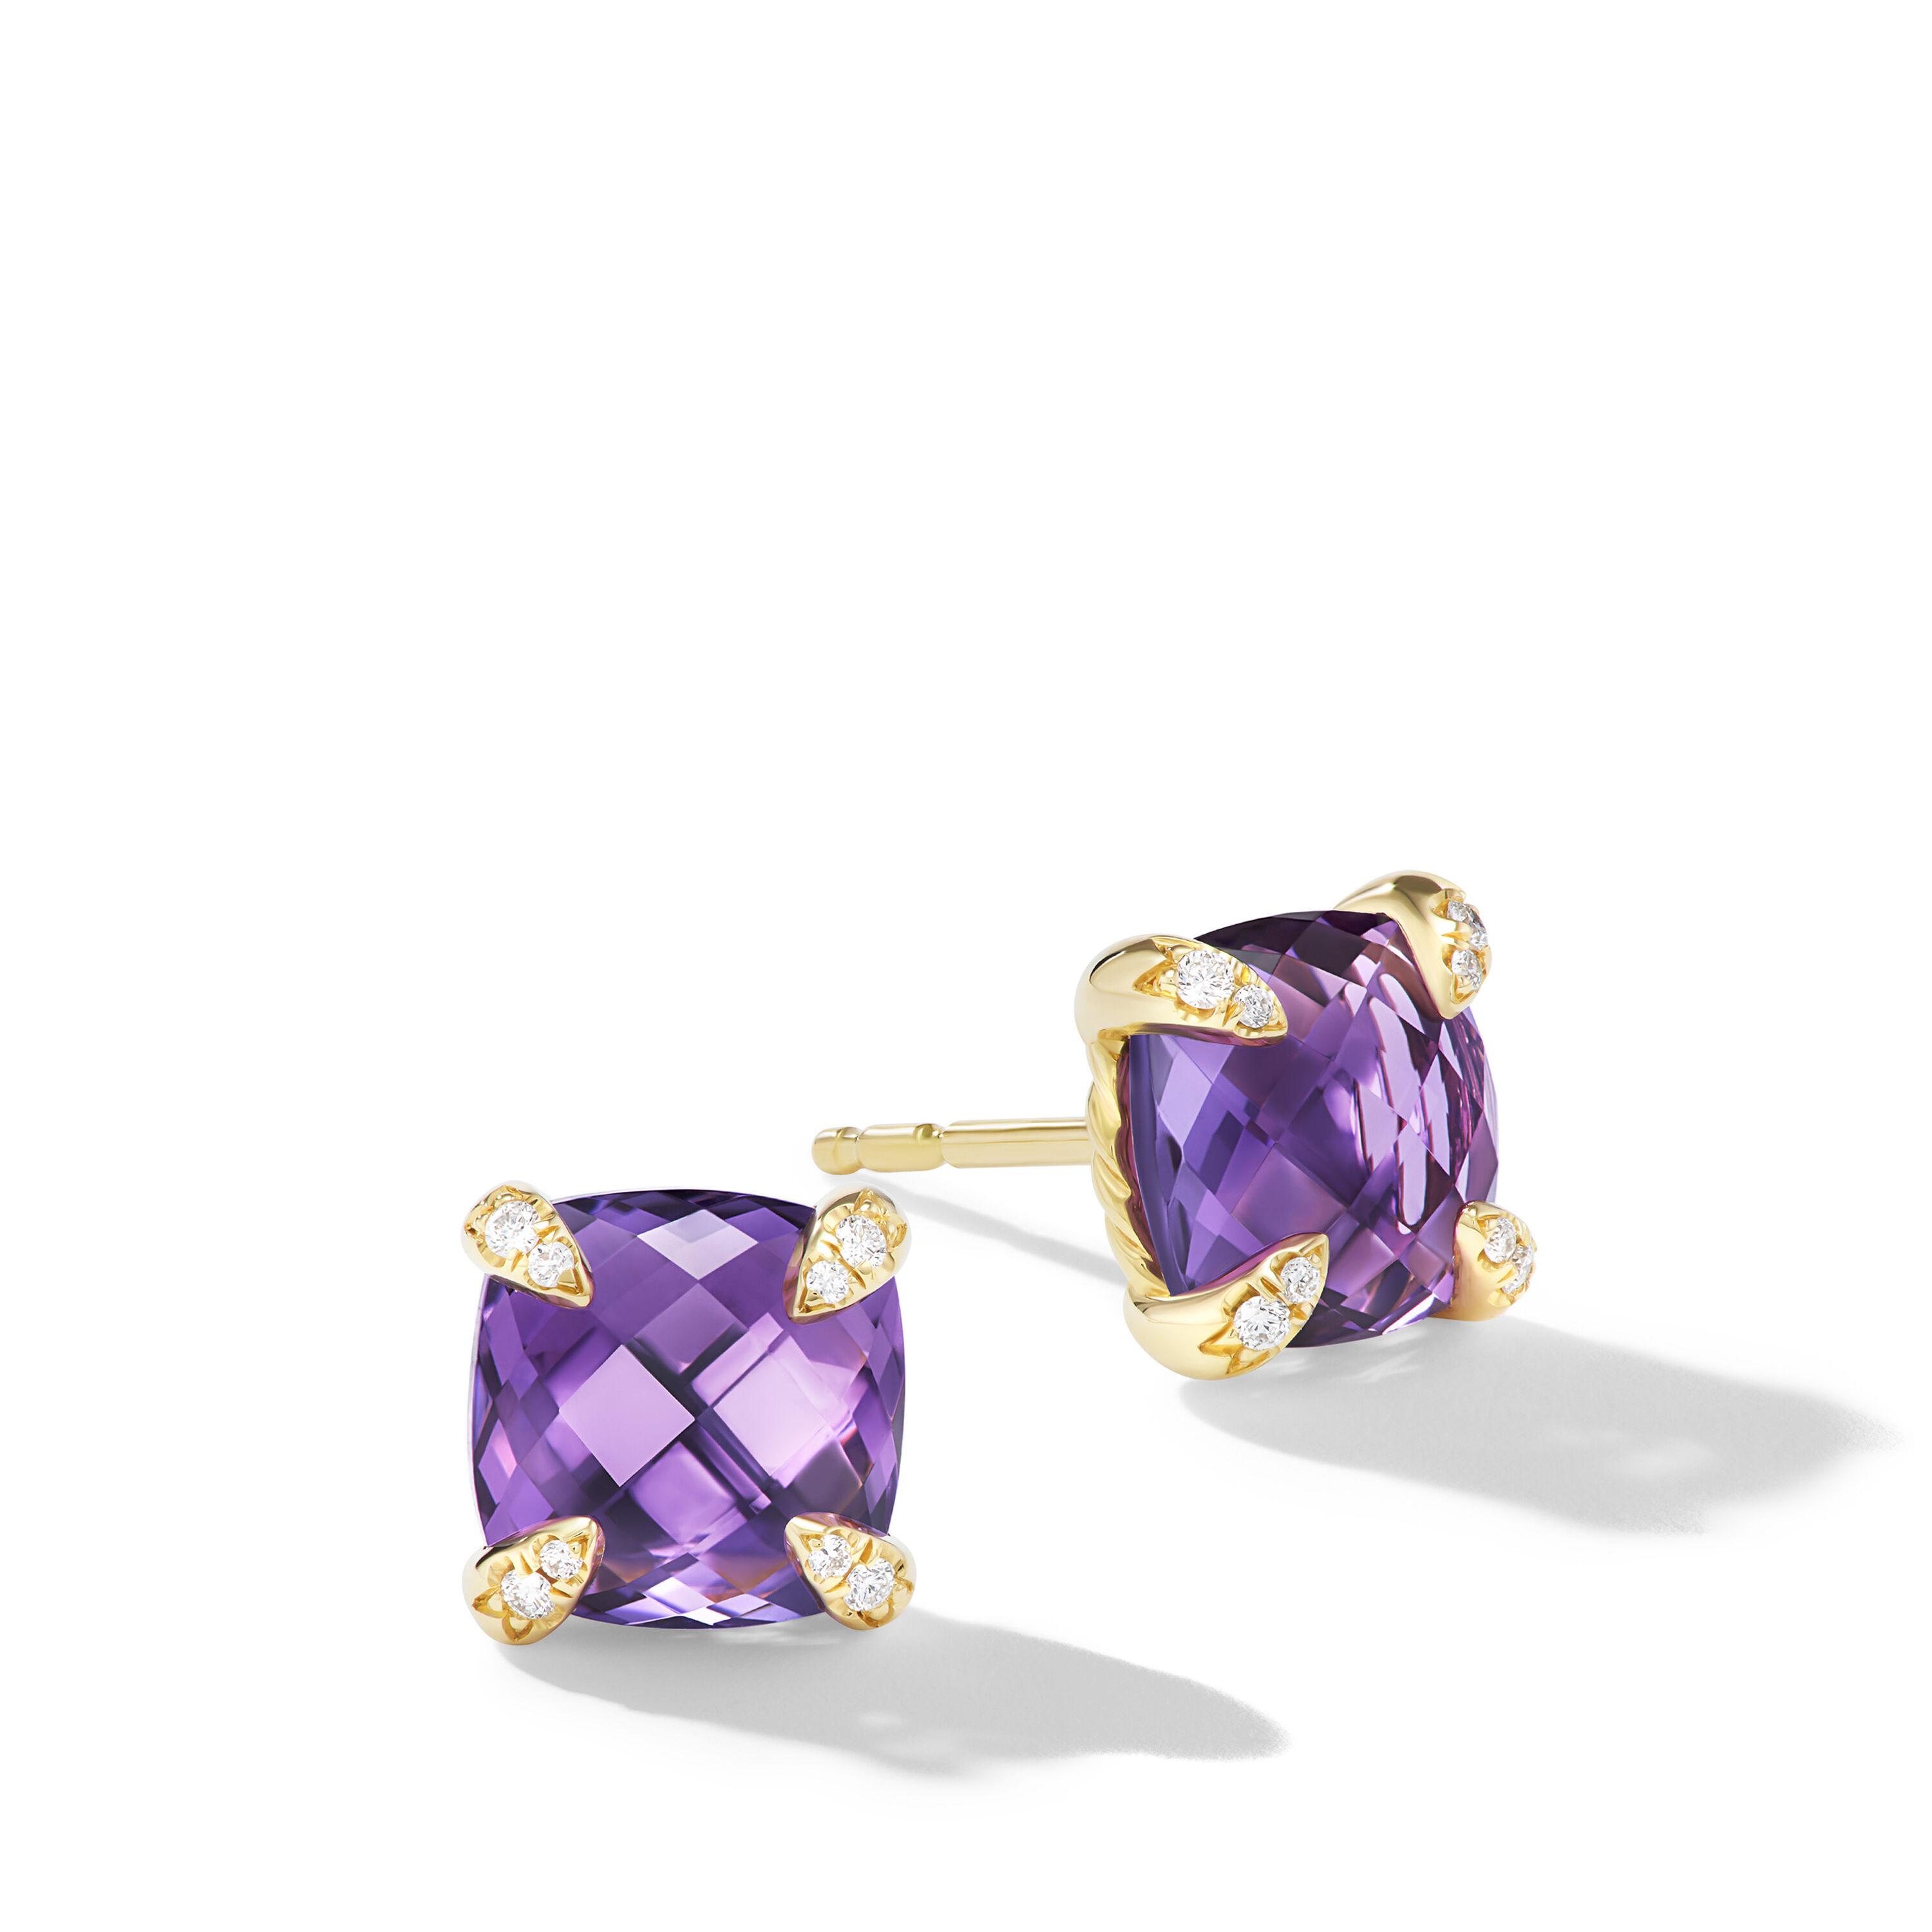 David Yurman Chatelaine Stud Earrings in 18K Yellow Gold with Amethyst and Diamonds, 8mm